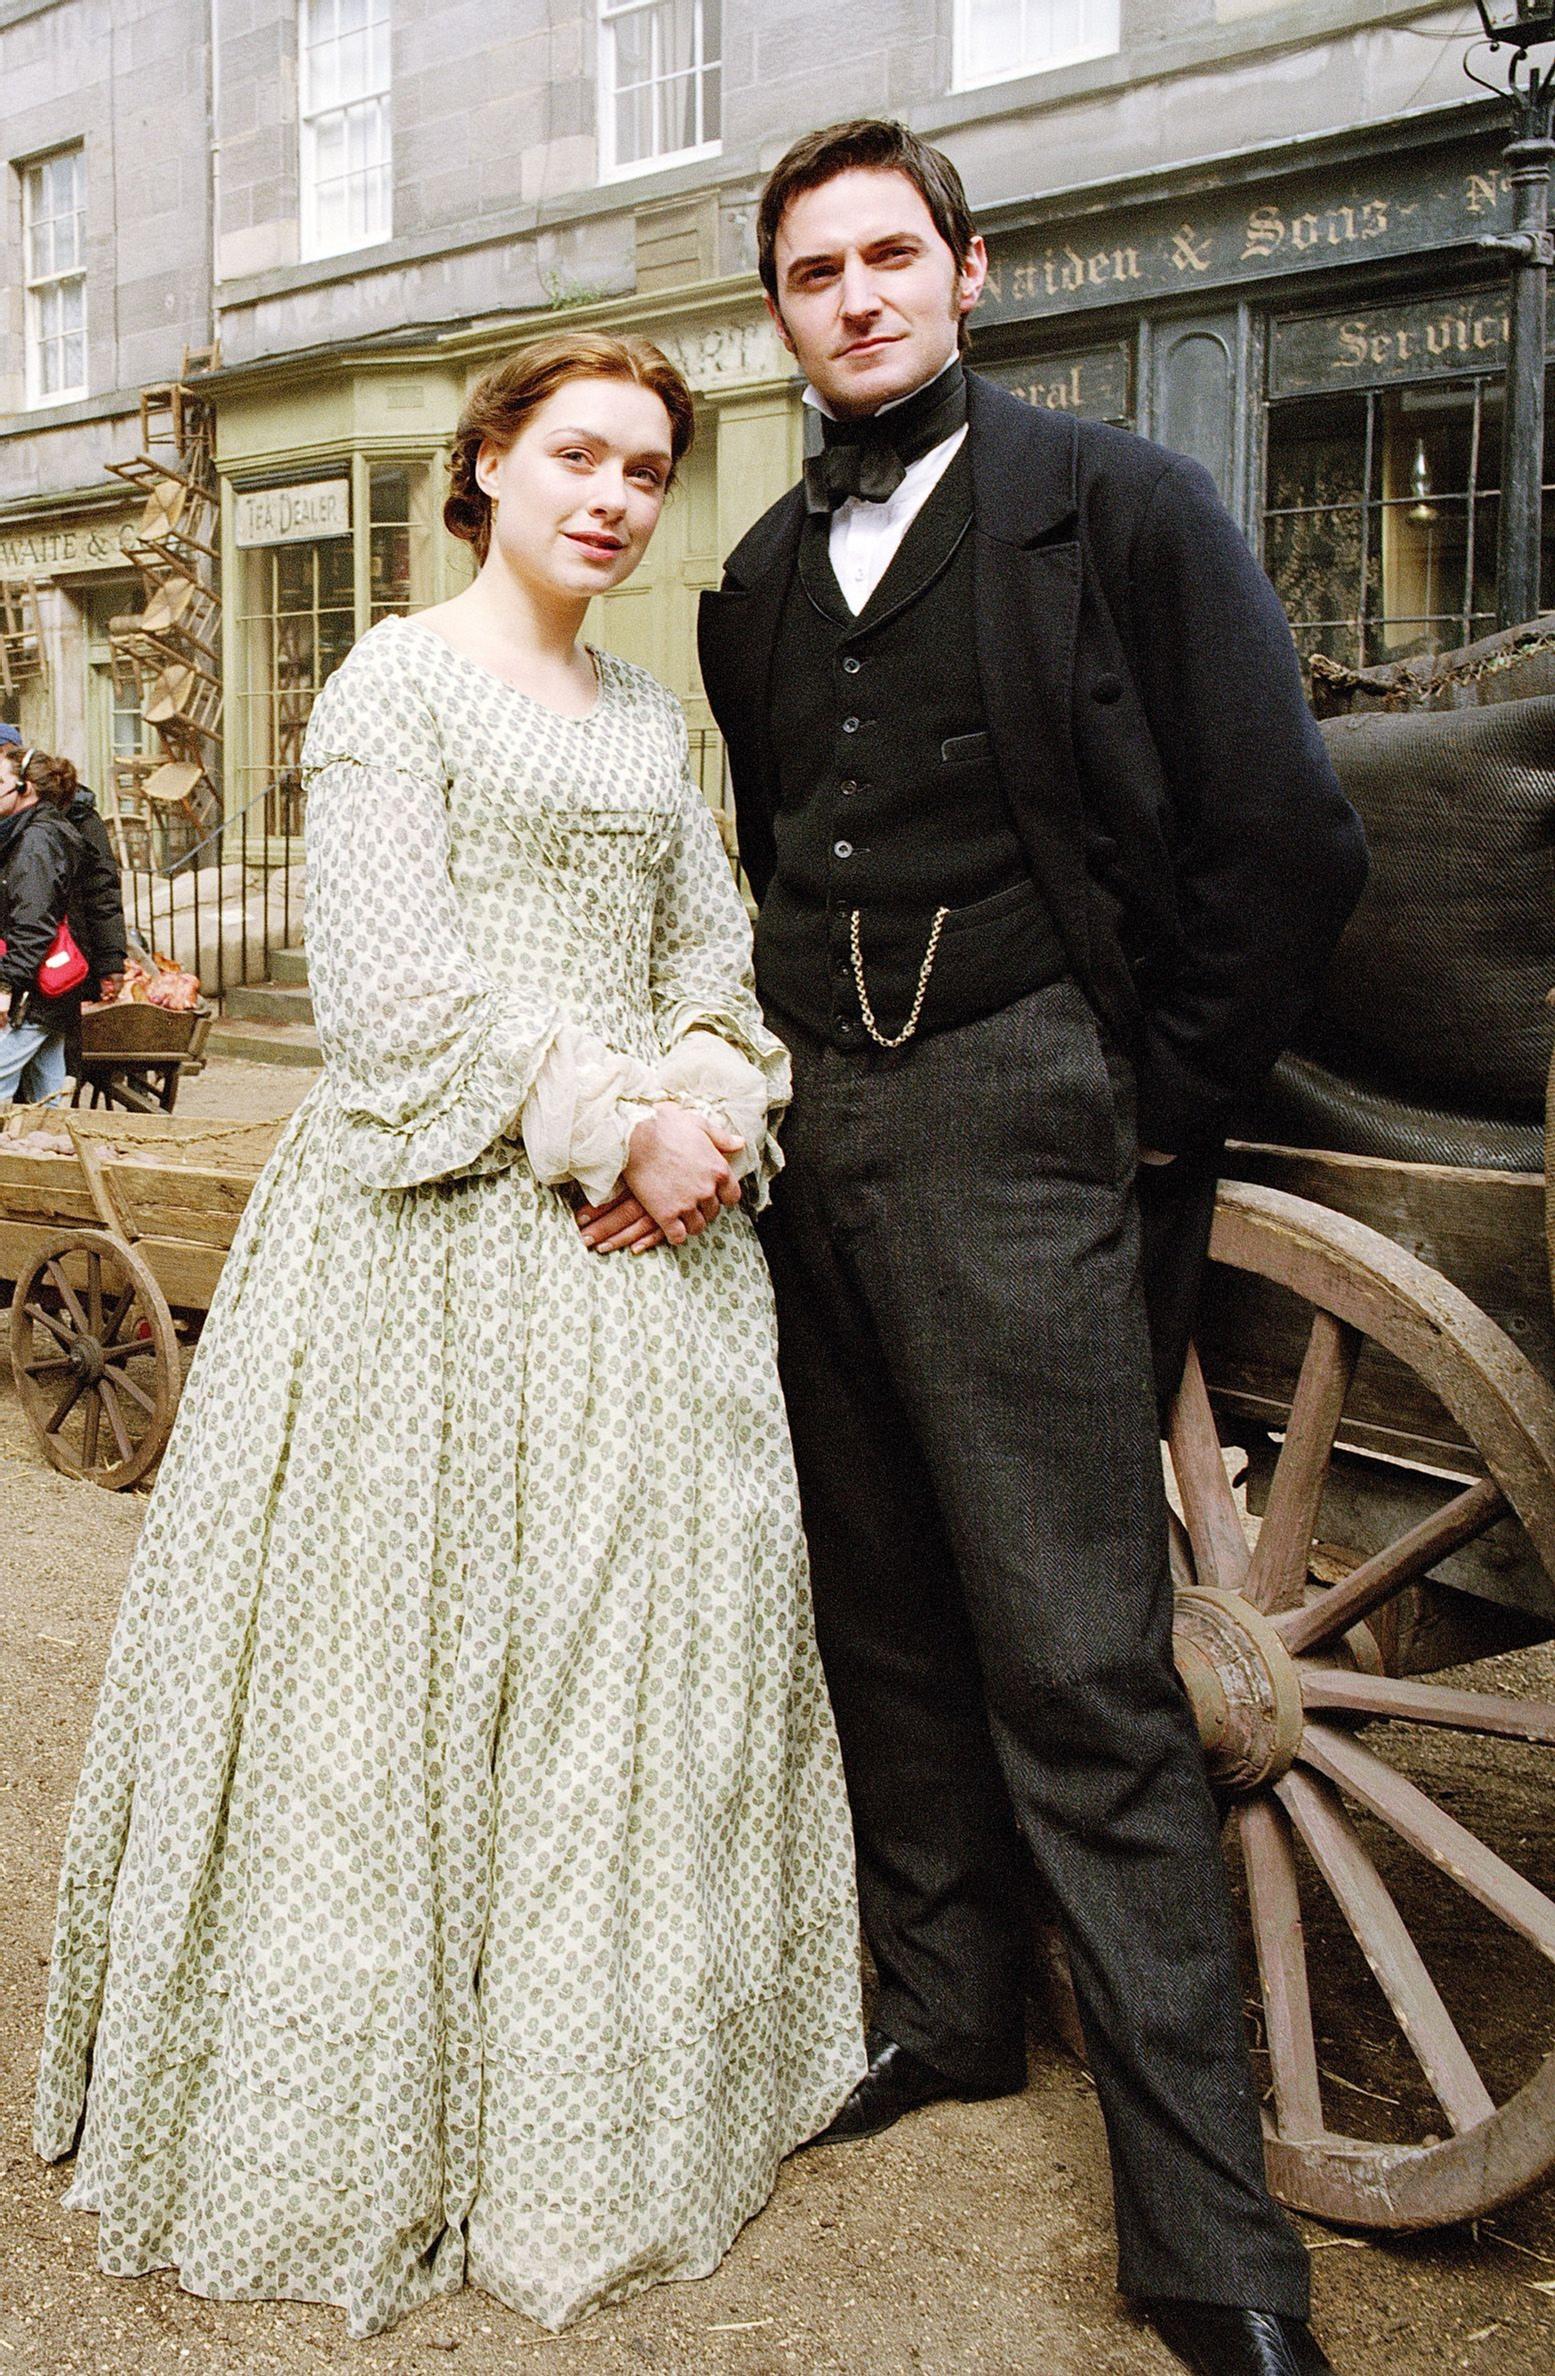 North And South [1985 TV Mini-Series]